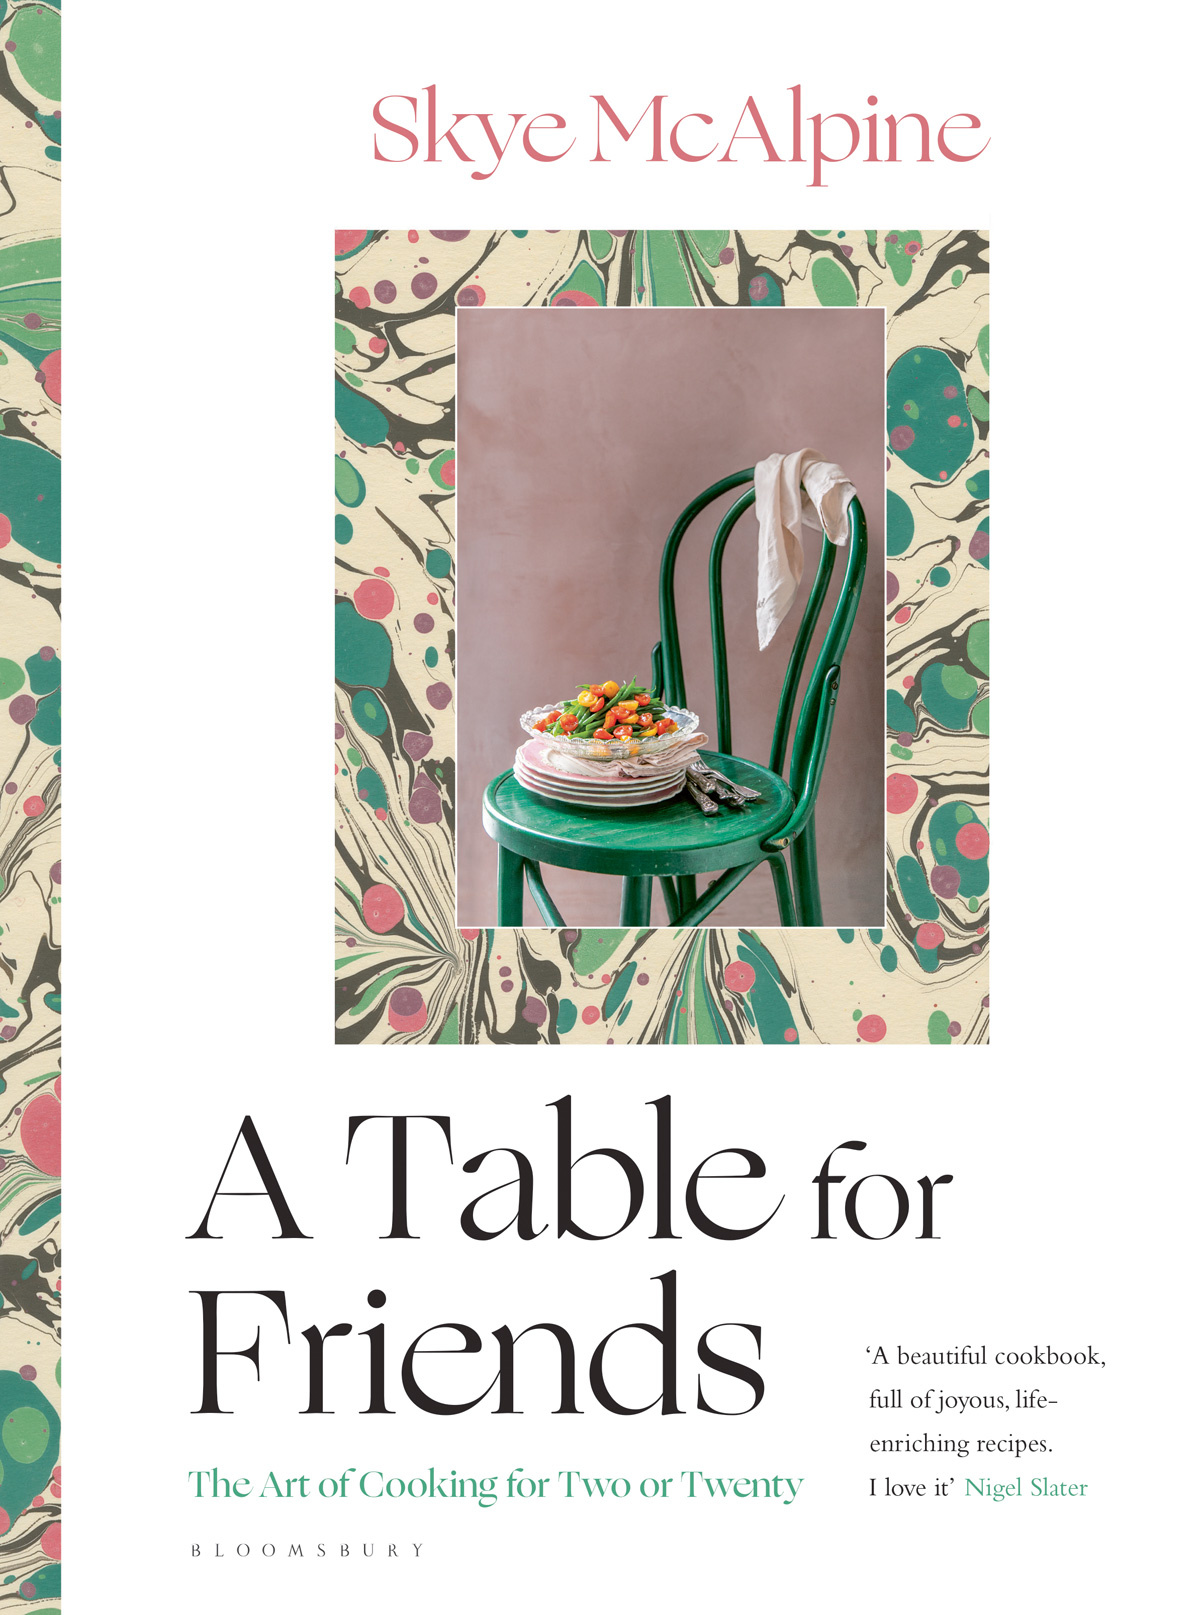 Book cover of A Table For Friends by Skye McAlpine